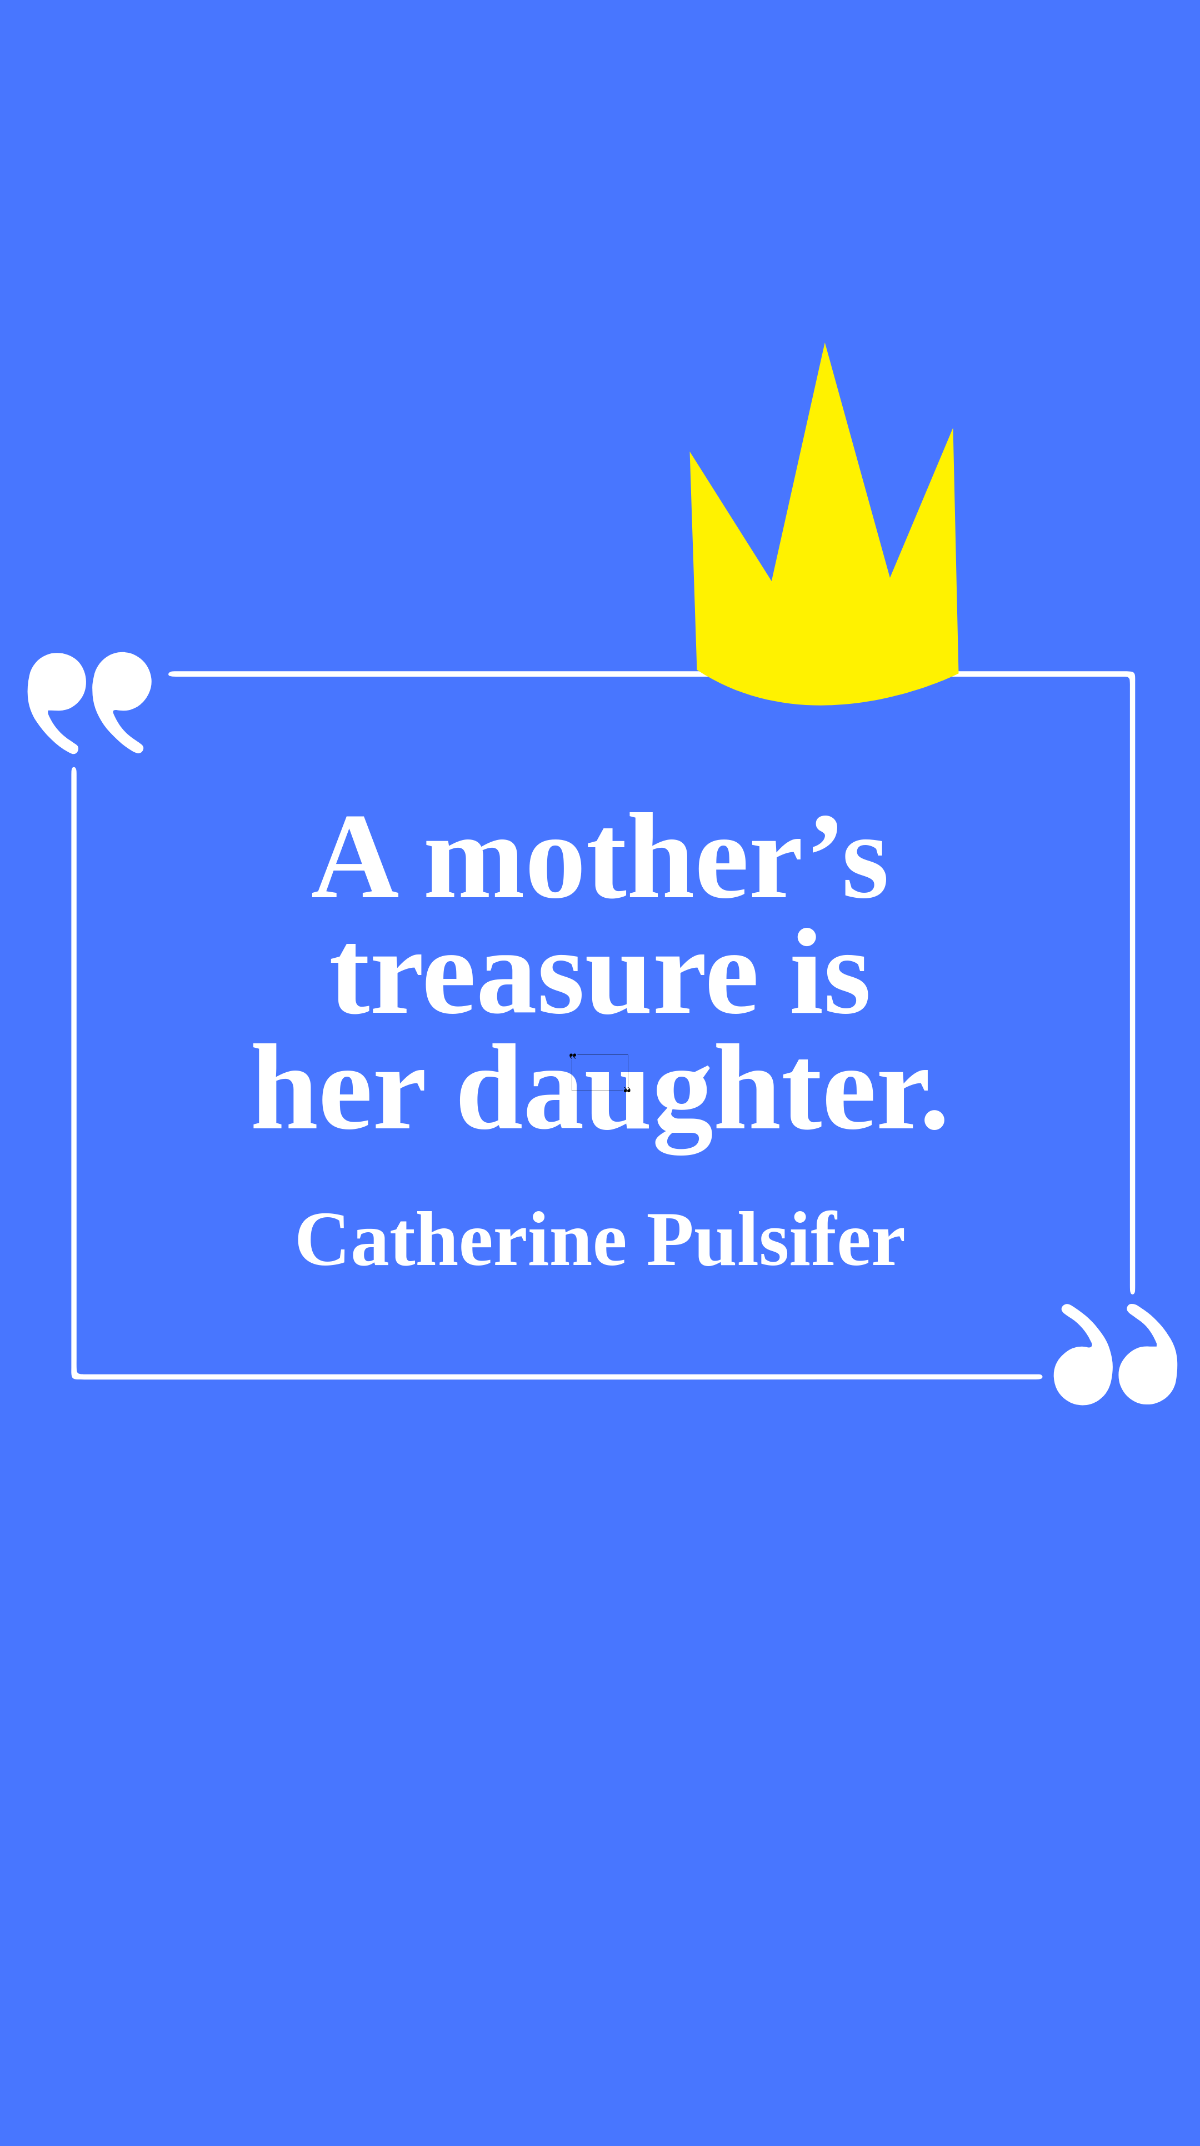 Catherine Pulsifer - A mother’s treasure is her daughter. Template